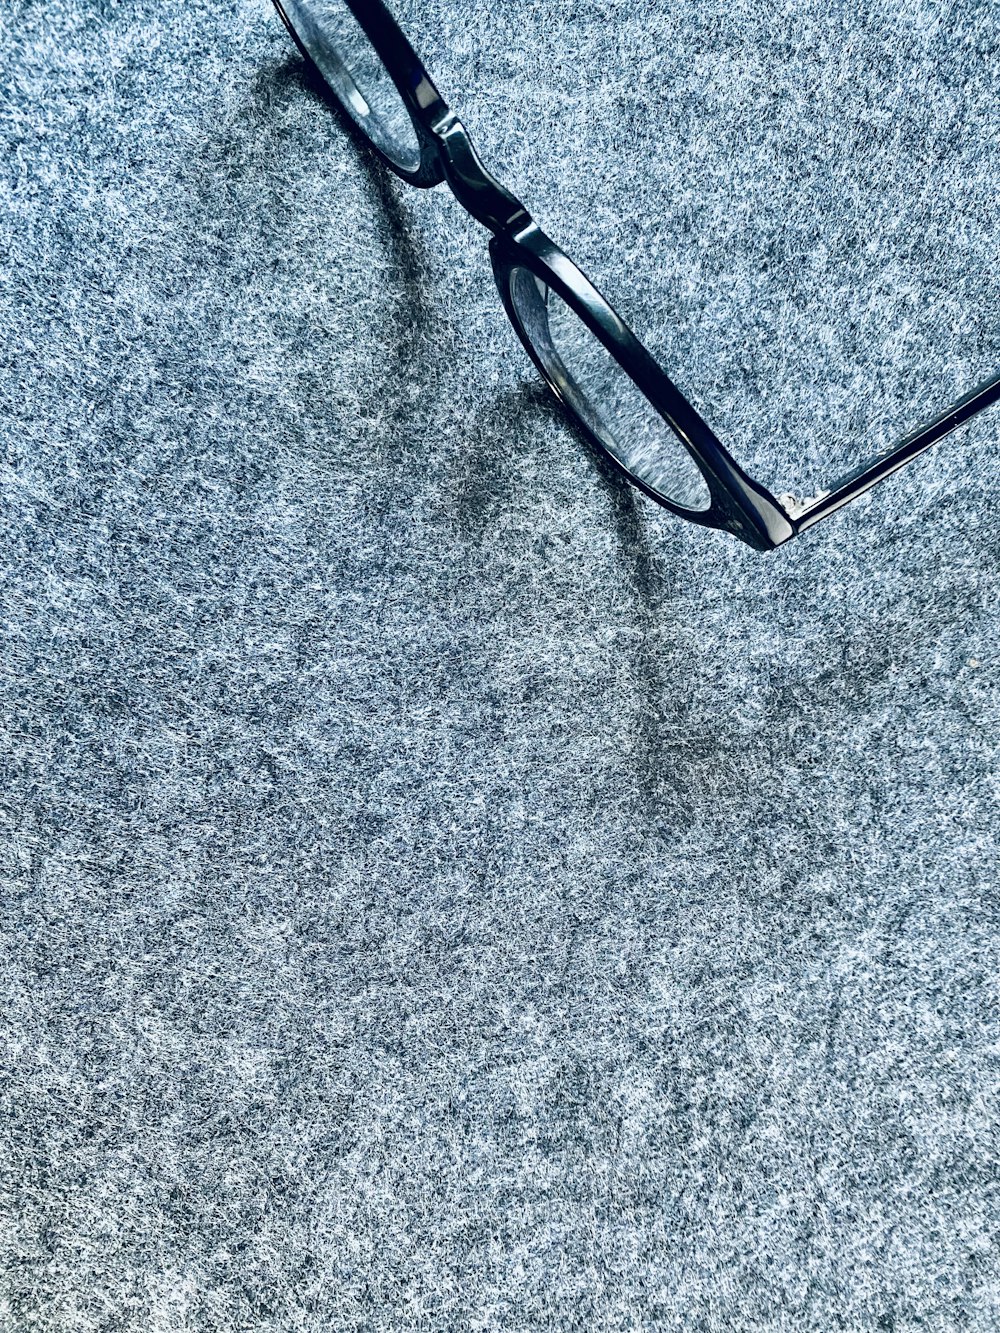 a pair of glasses laying on top of a gray carpet